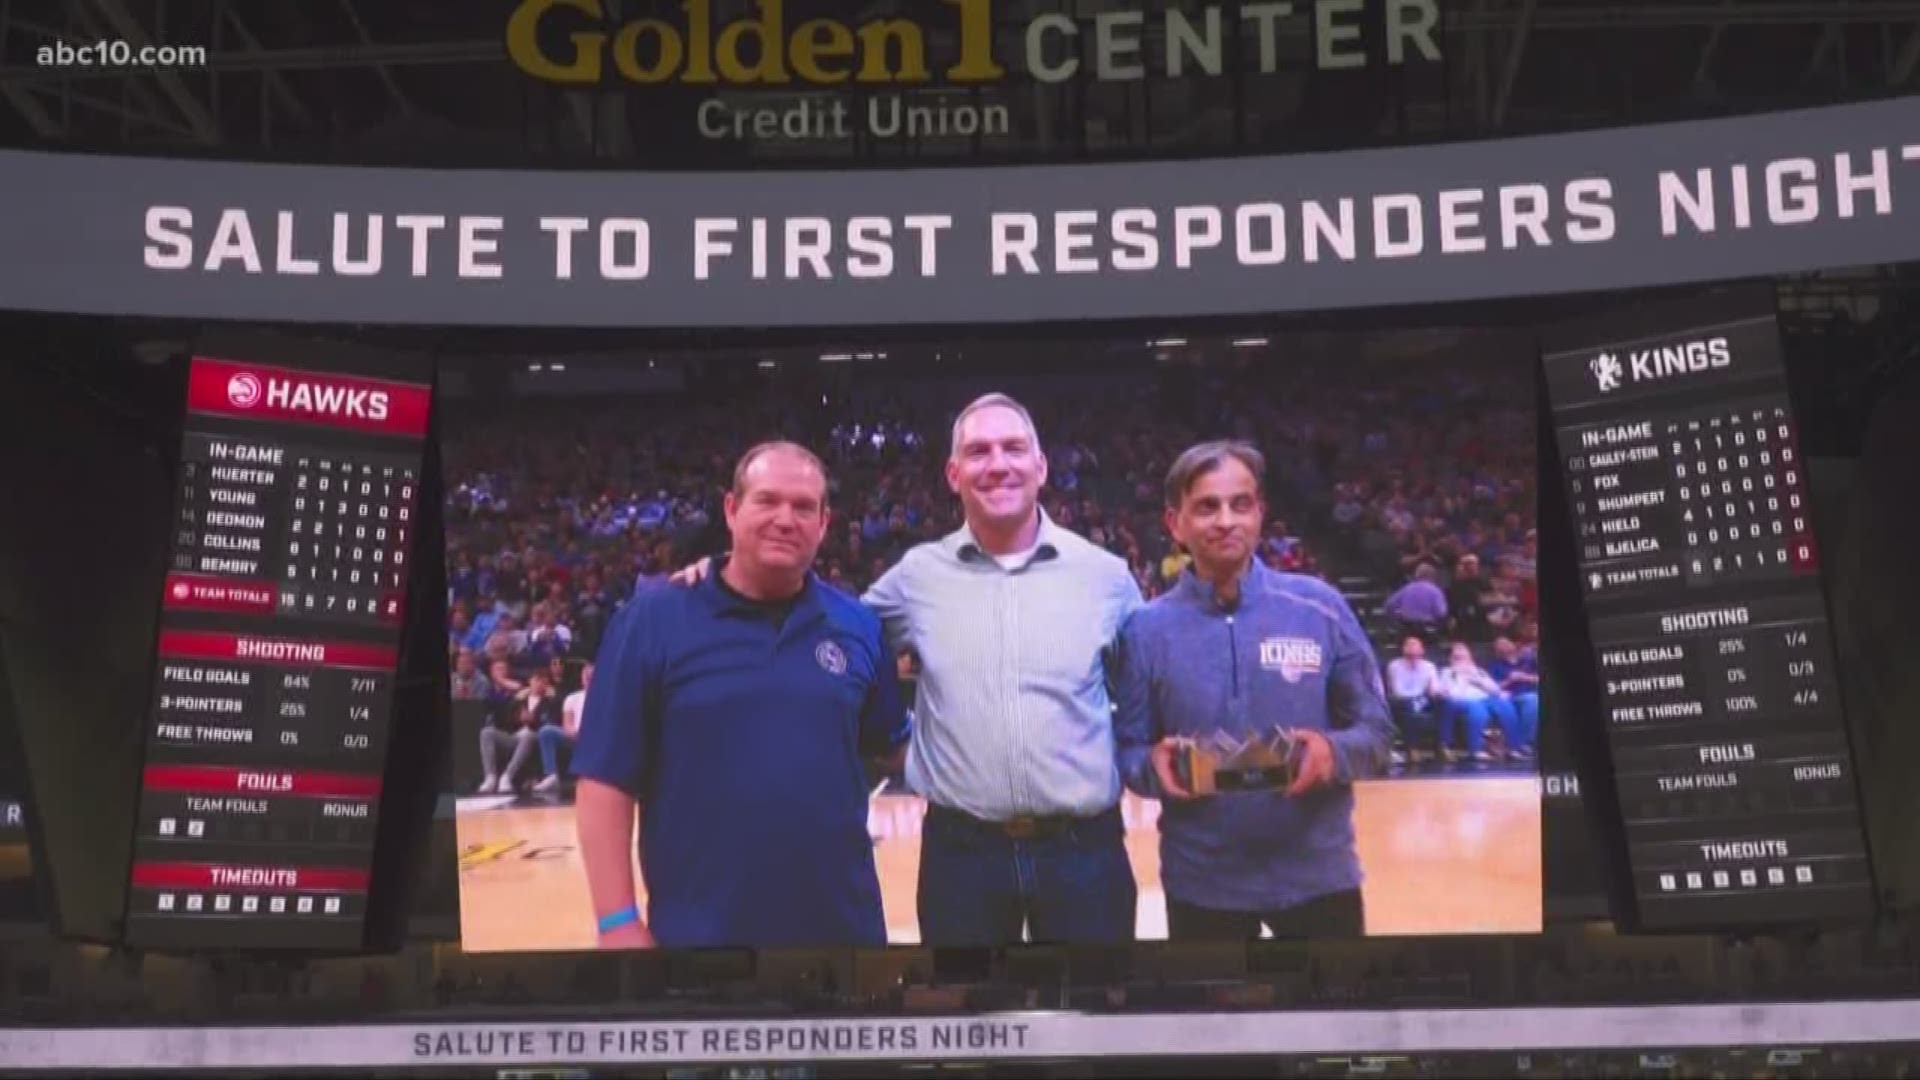 First responders were recognized at Wednesday's Sacramento Kings game for all they do in the community and for their bravery during the Camp and Carr fires this past year.